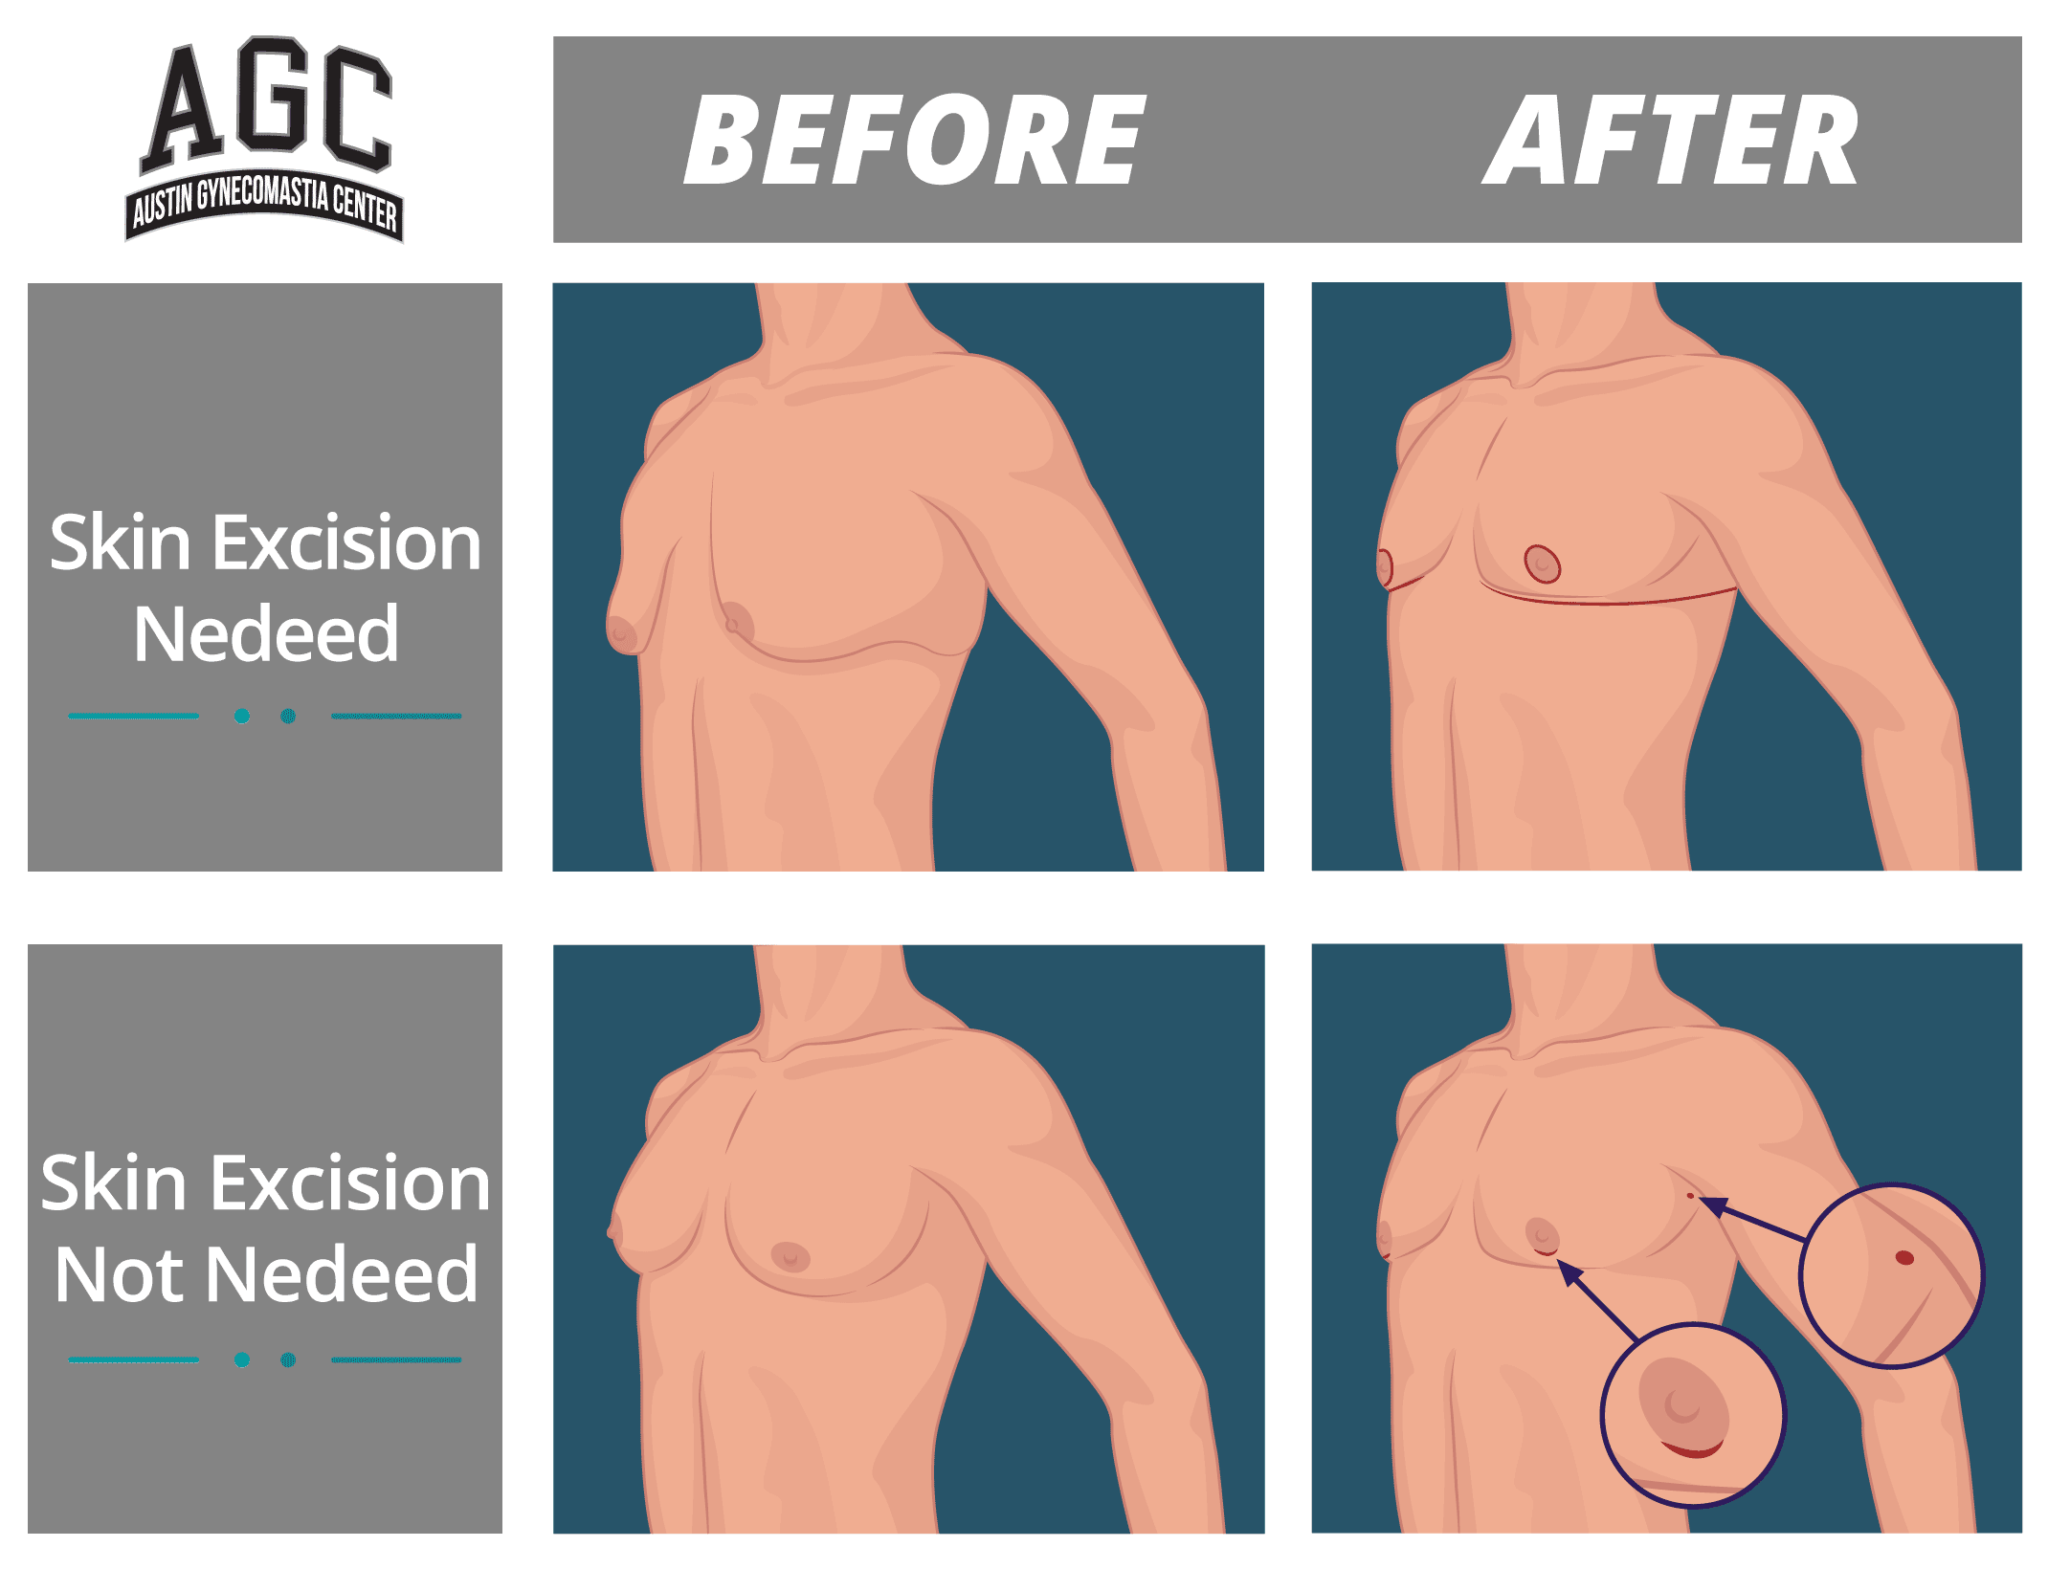 Austin gynecomastia surgery patient before and after photographs